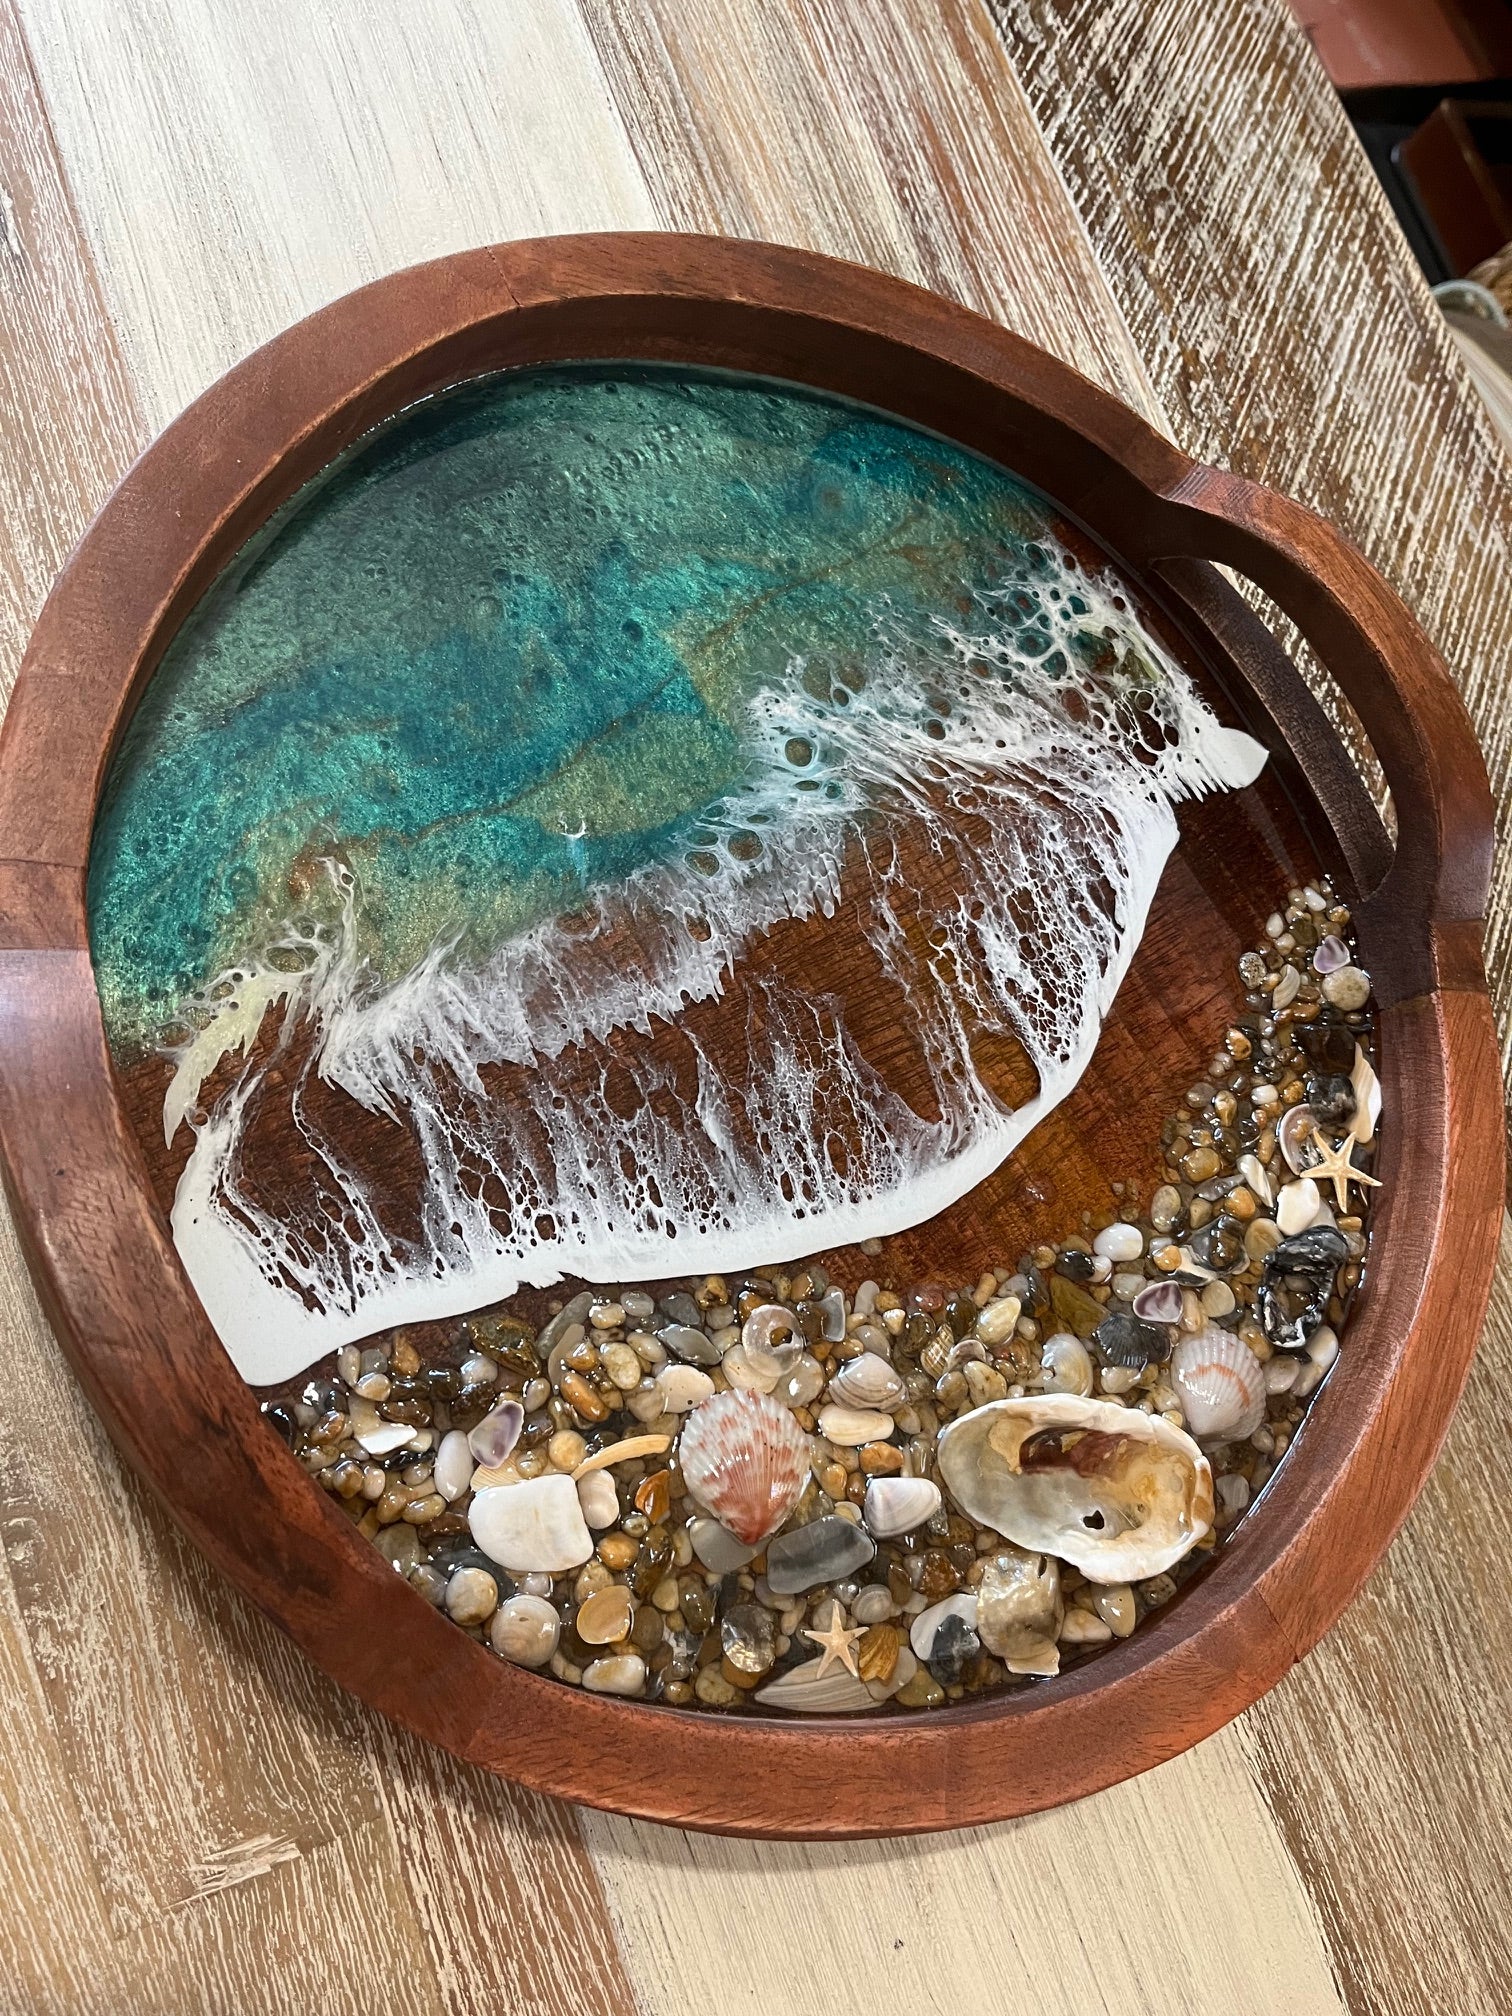 You need this gorgeous serving tray decorating your beach home. Beautifully hand crafted with resin waves memorializing the ocean crashing on the beaches of OBX.  Size is 14" Round Wood Tray with Handles.  Adorned with Ocean Resin Waves and Sea Shell Collected from the beaches of the Outer Banks. Serving Tray has Teal Blue Waves with Real Outer Banks Sea Shells. Hand made by Fyre Art Studio, an OBX Resin Artist located in Kill Devil Hills North Carolina.